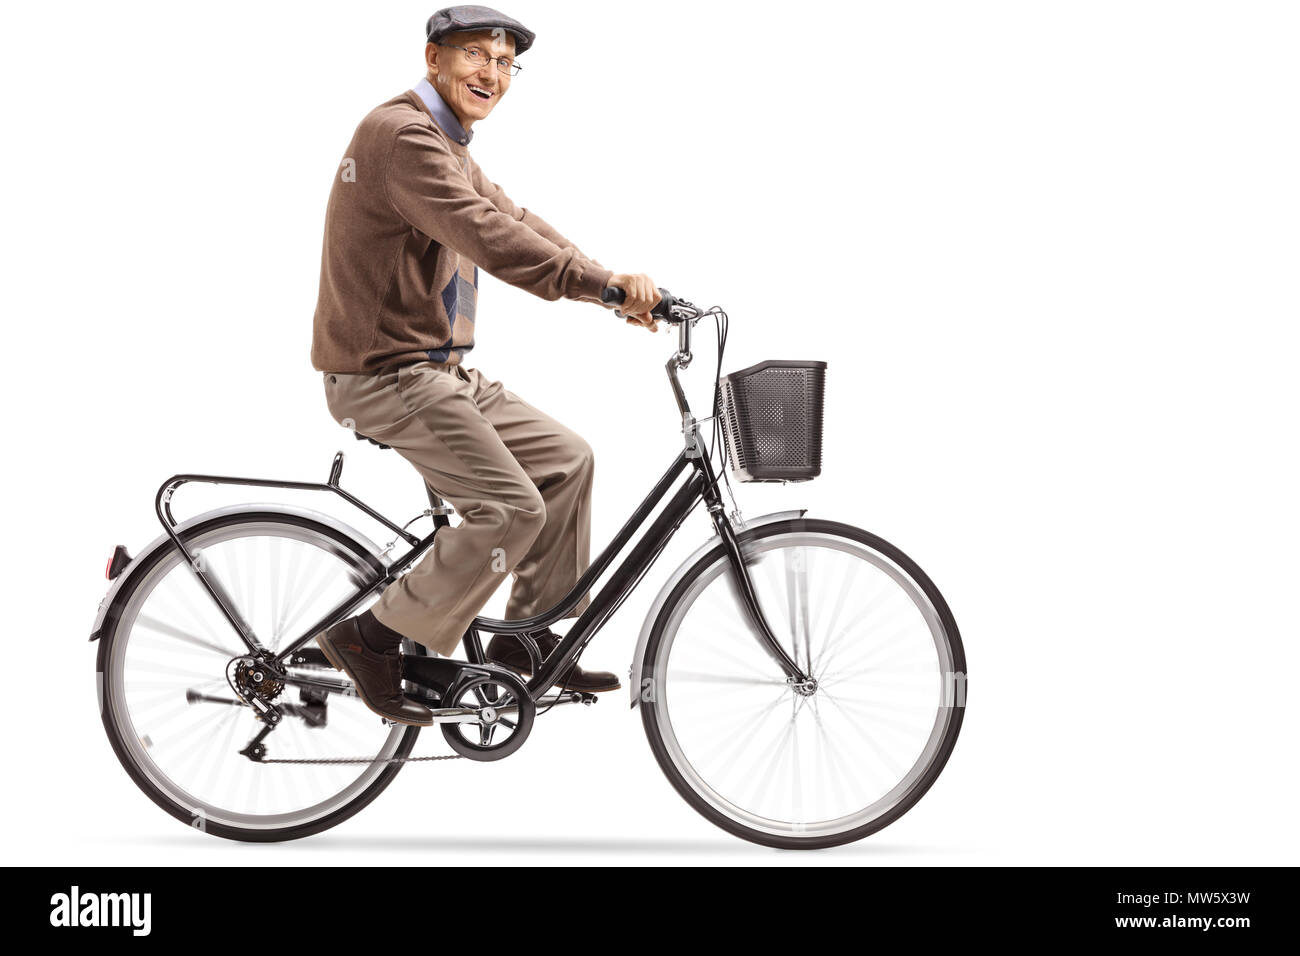 Elderly man riding a bicycle isolated on white background Stock Photo